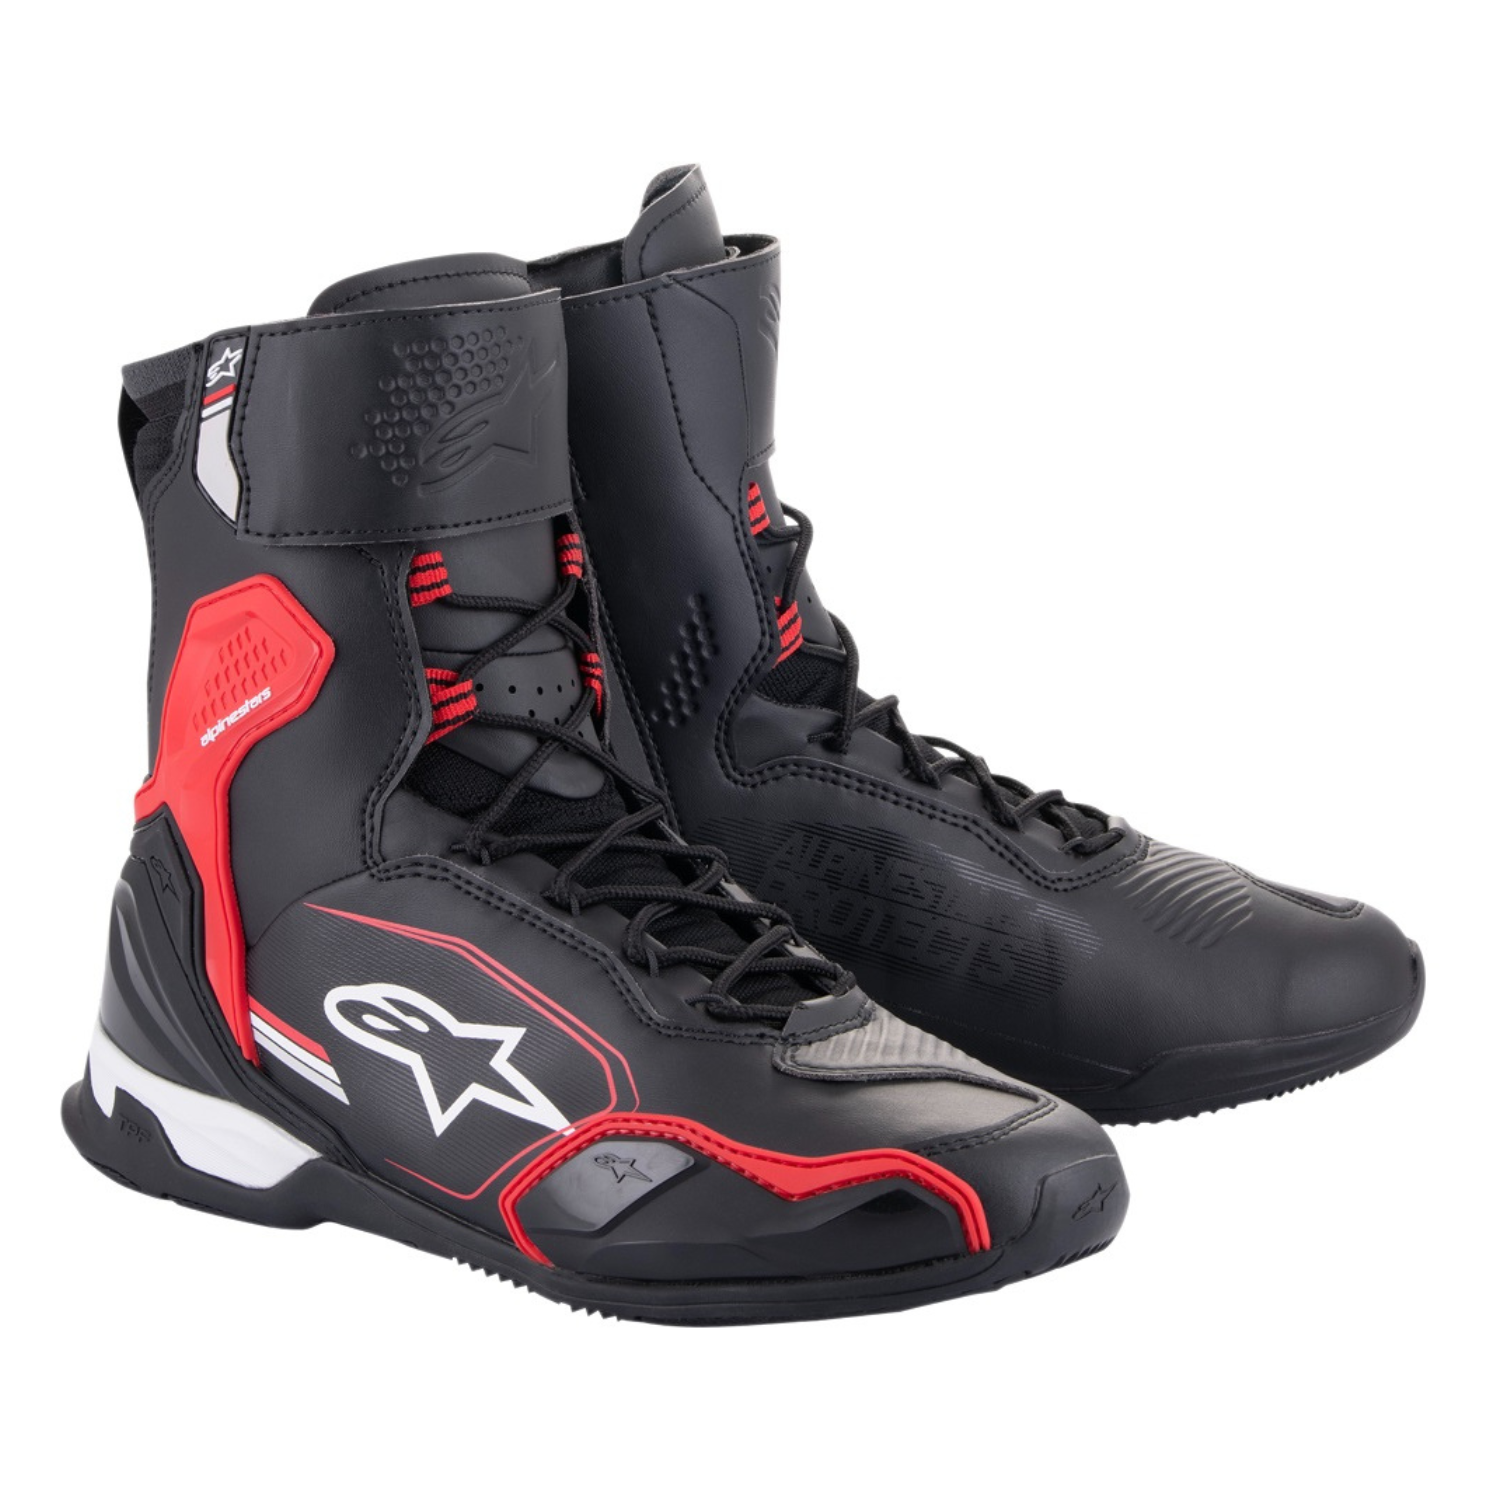 Image of Alpinestars Superfaster Shoes Black Bright Red White Talla US 7